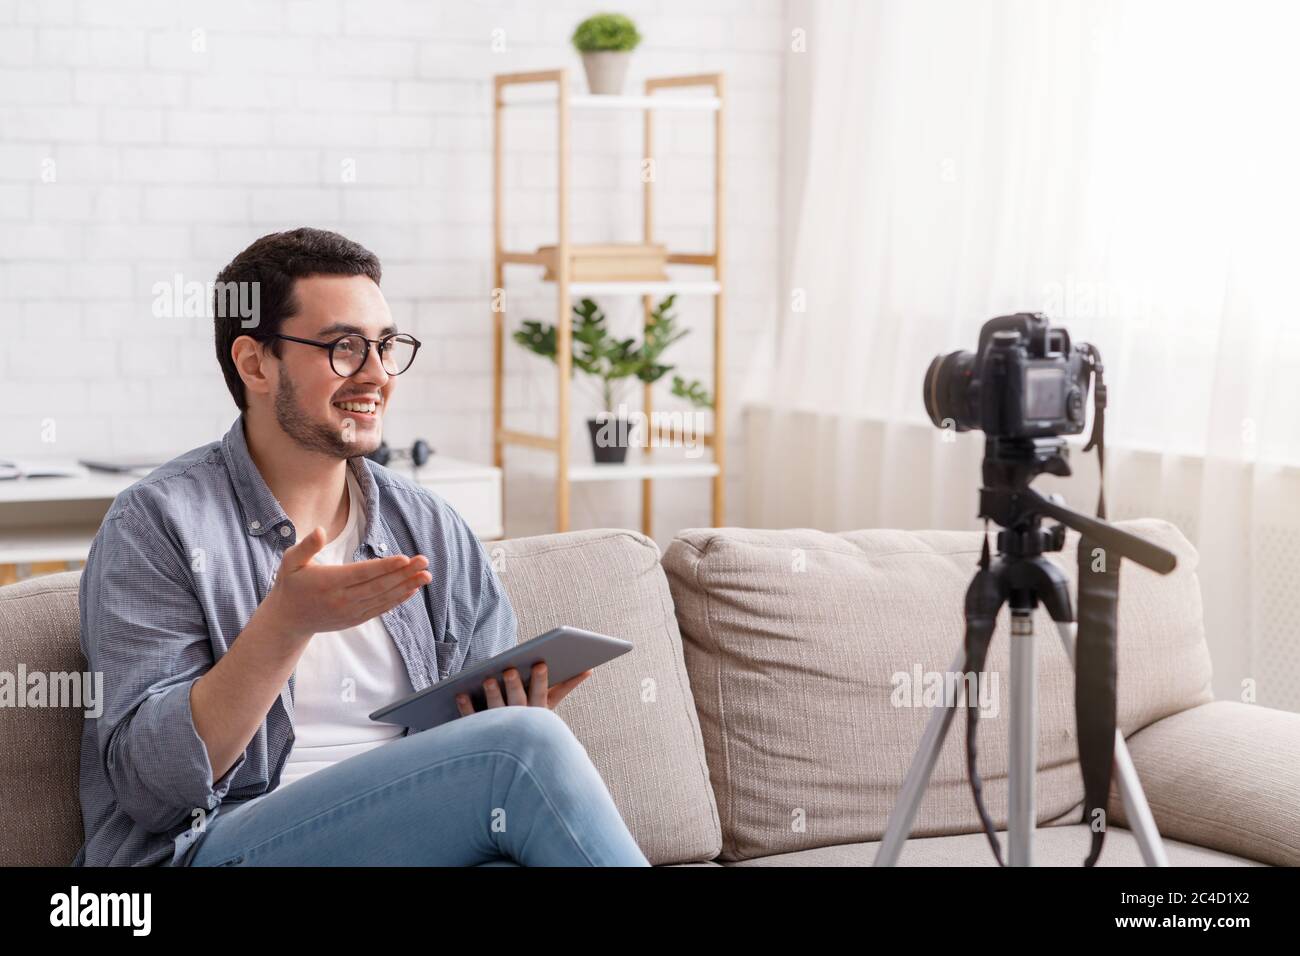 Confident young man recording on camera to blog. Speaking with enthusiasm Stock Photo